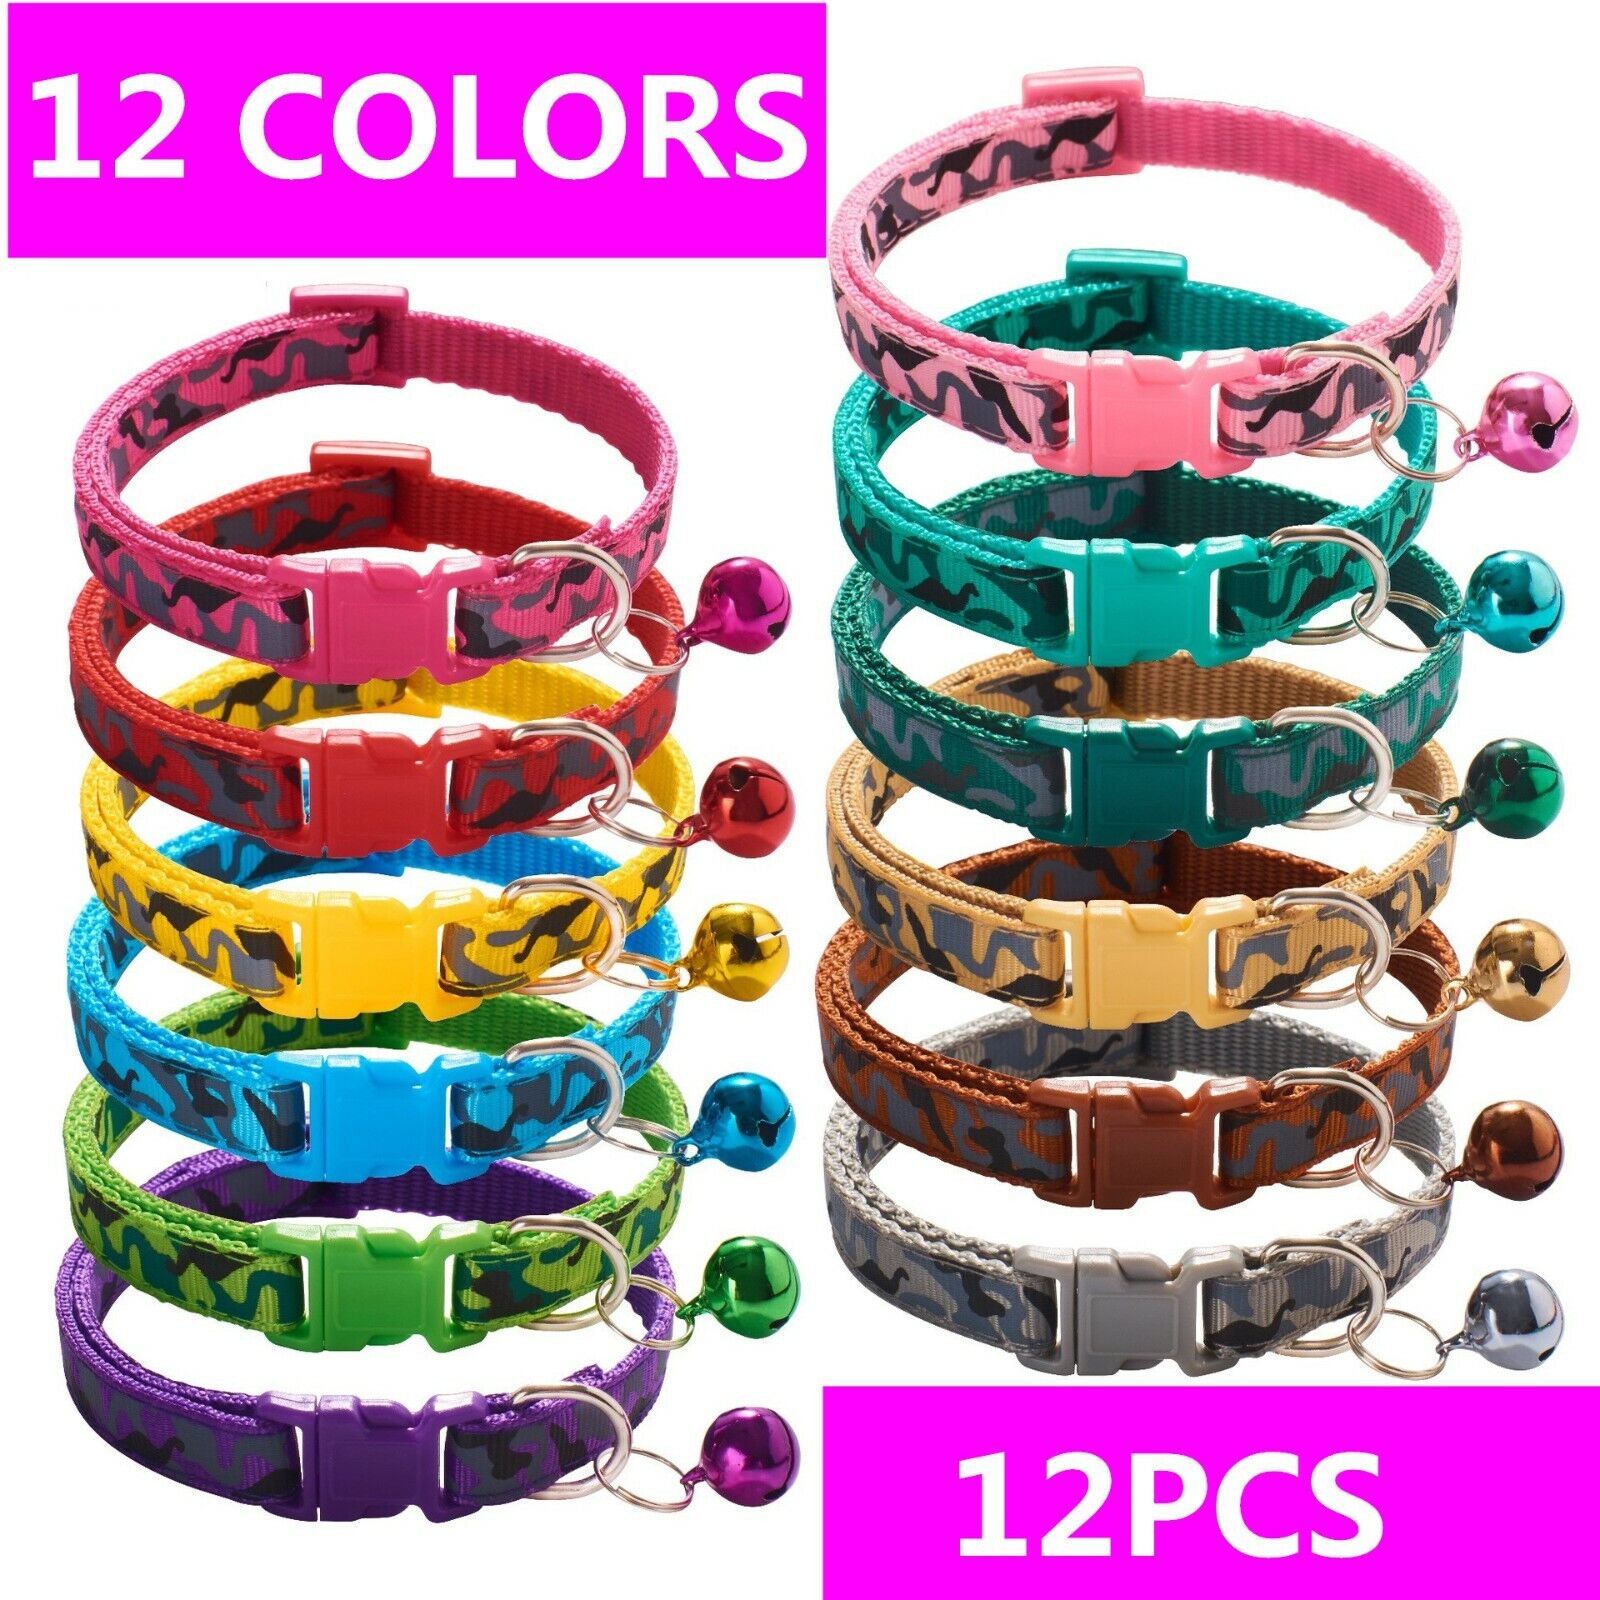 12 PCS Lot of Wholesale Dog Collar Adjustable Buckle Collar W/ Bell Small Puppy Unbranded